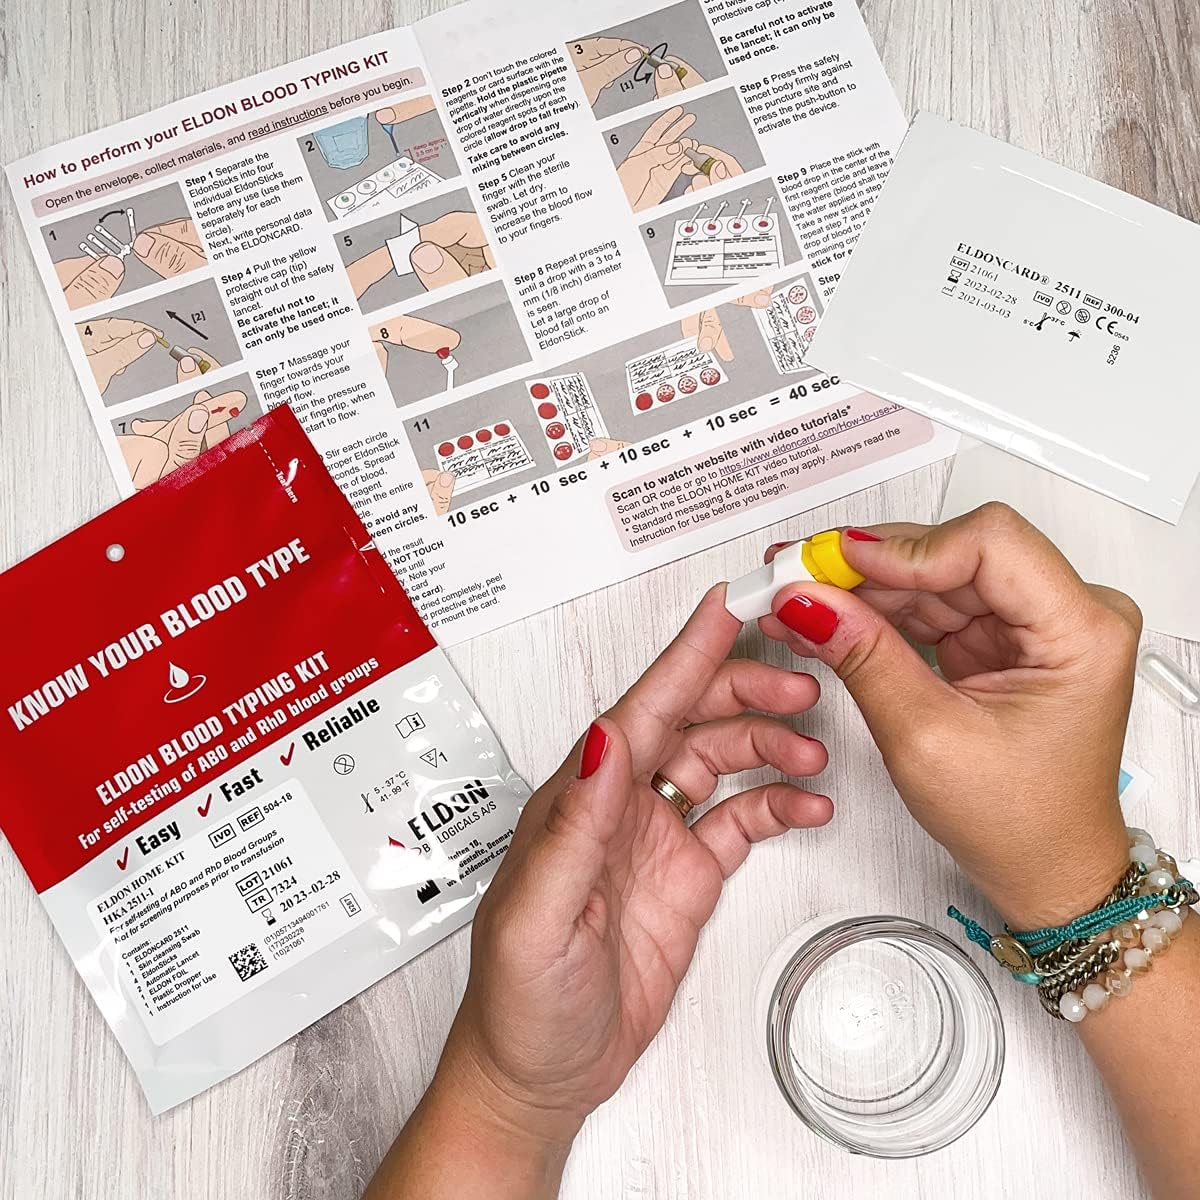 Original Home Blood Typing Kit – New Package + Improved Lancet (10 Kits) Review